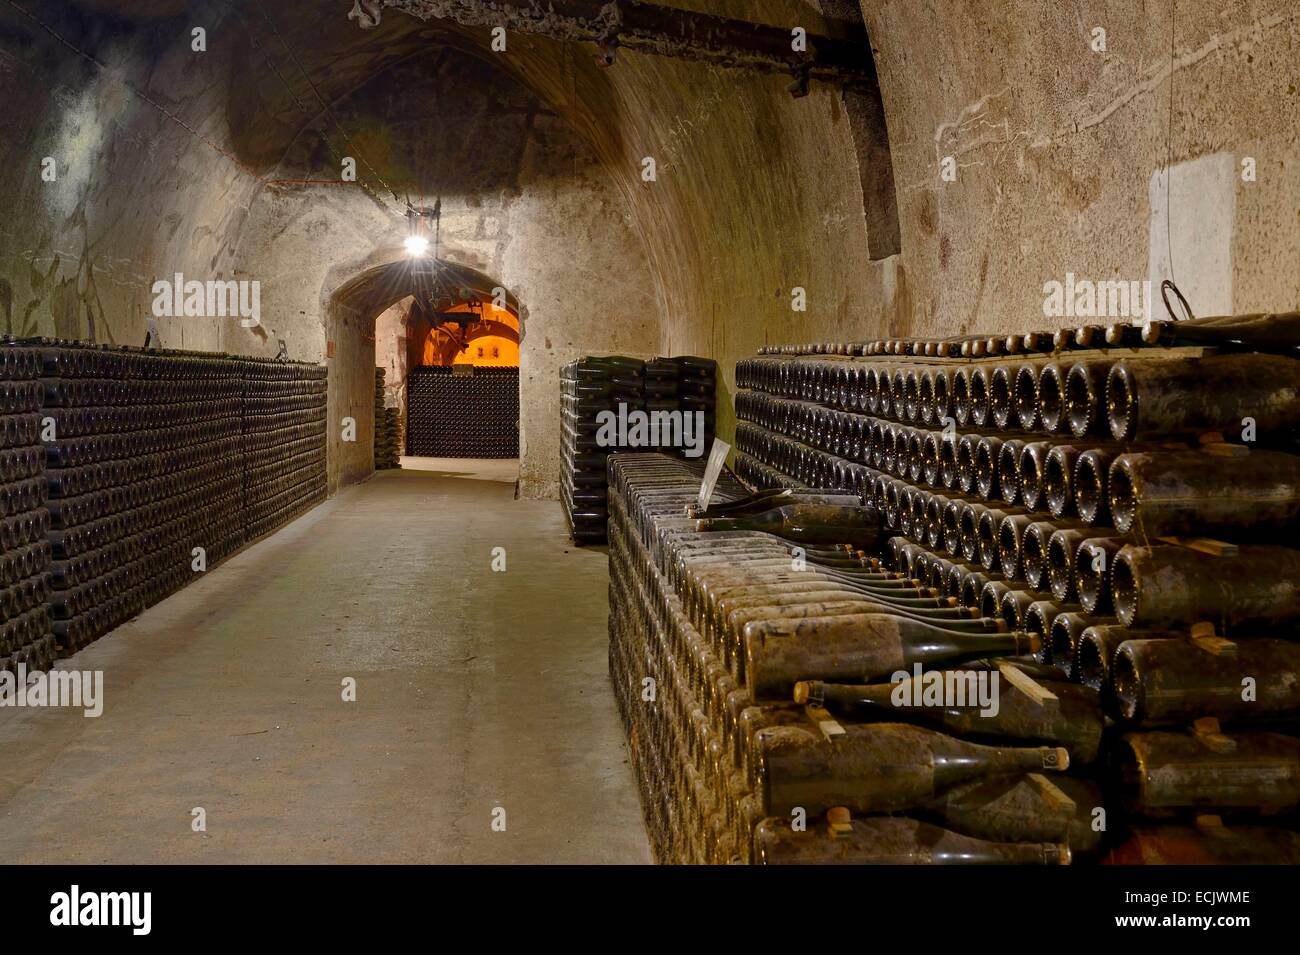 France, Marne, Reims, Champagne, Pommery's Wine Cellars Banque D'Images